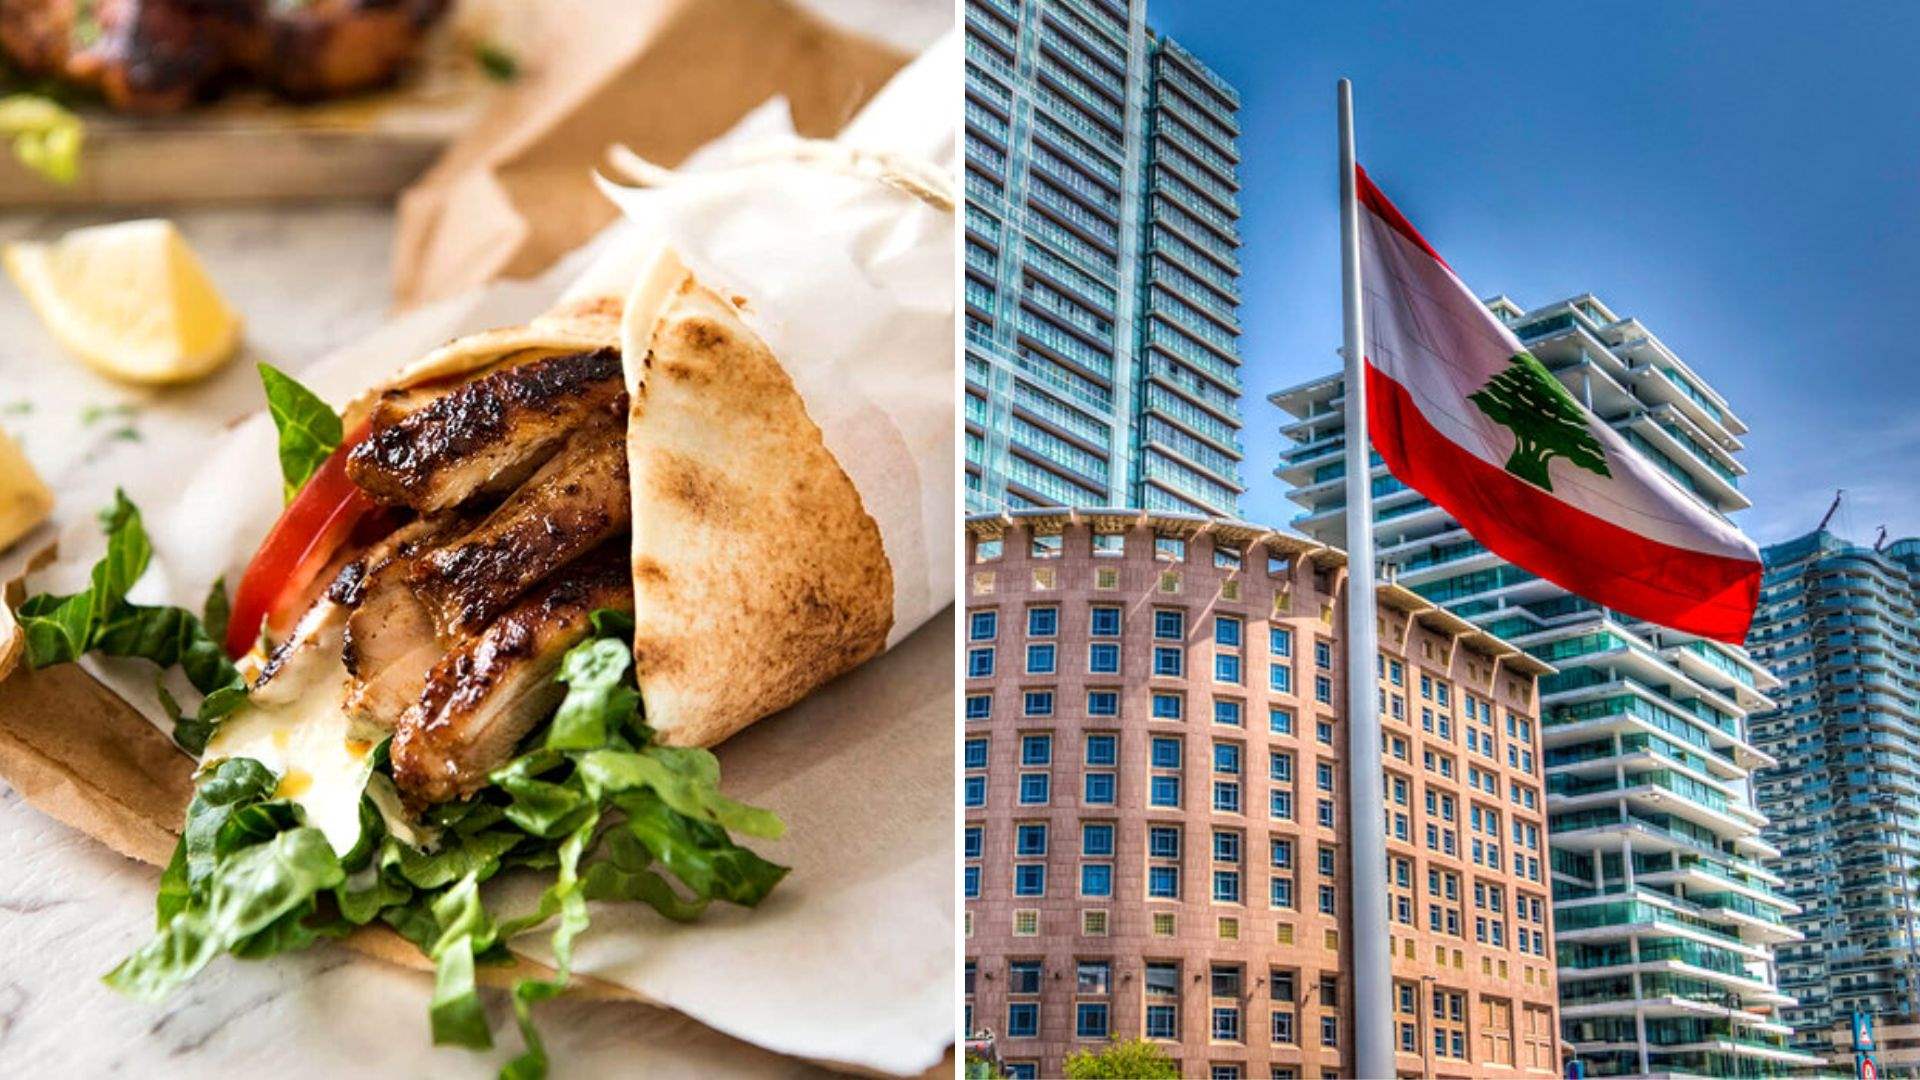 Lebanon&#39;s &#39;gastronomic glory&#39;: Shawarma and cuisine shine in TasteAtlas&#39; top &#39;100 Best Cuisines and Dishes of the World&#39;